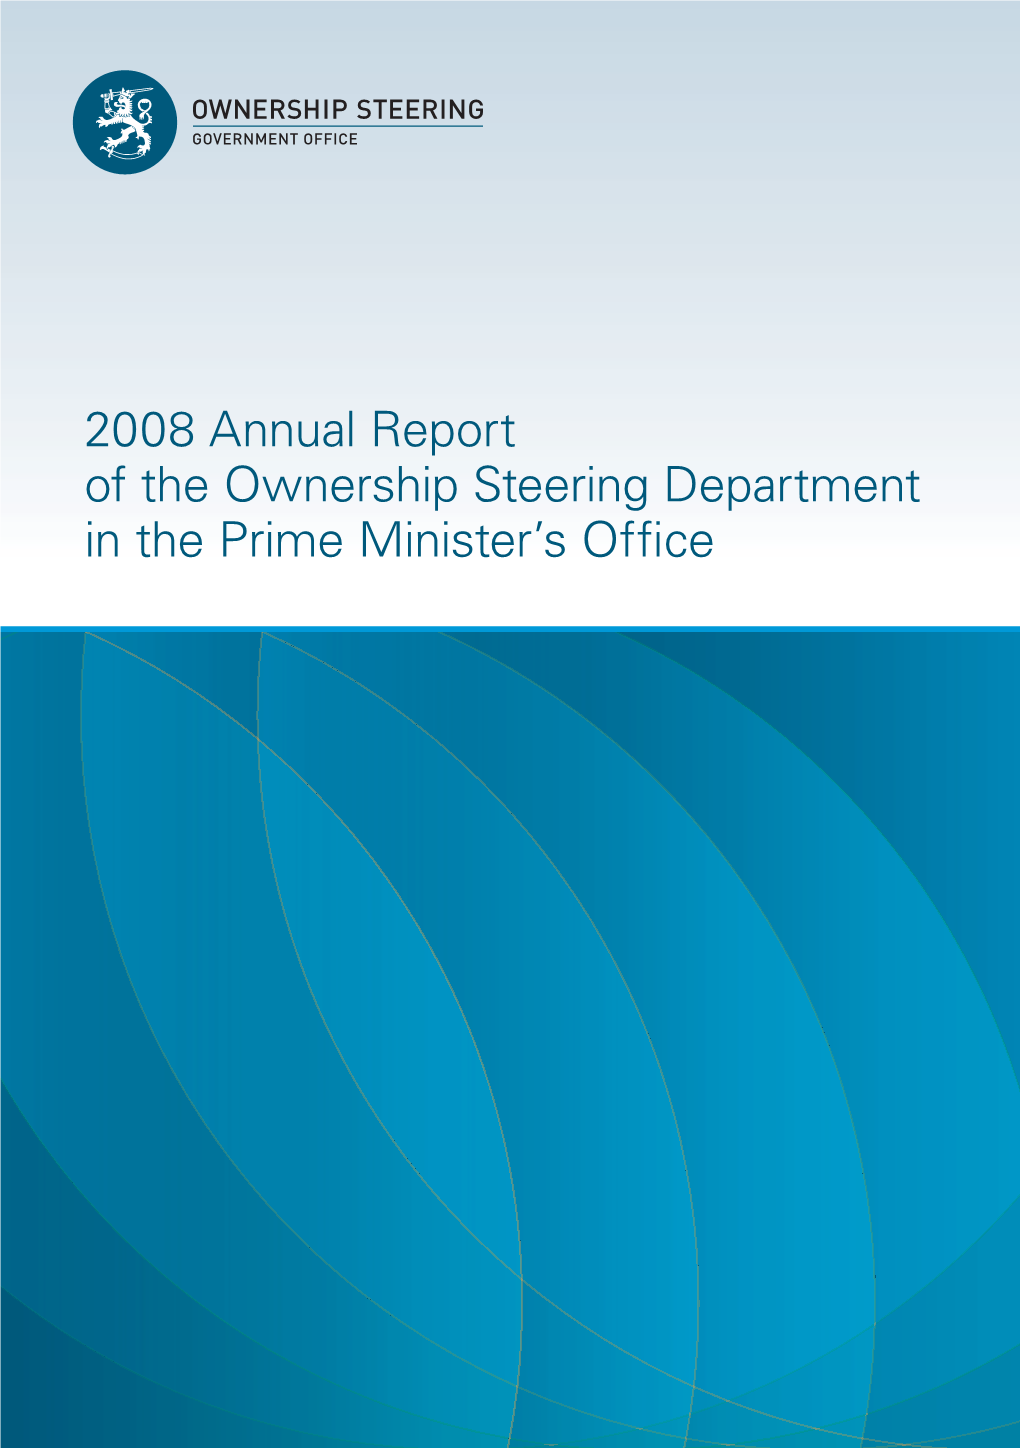 2008 Annual Report of the Ownership Steering Department in the Prime